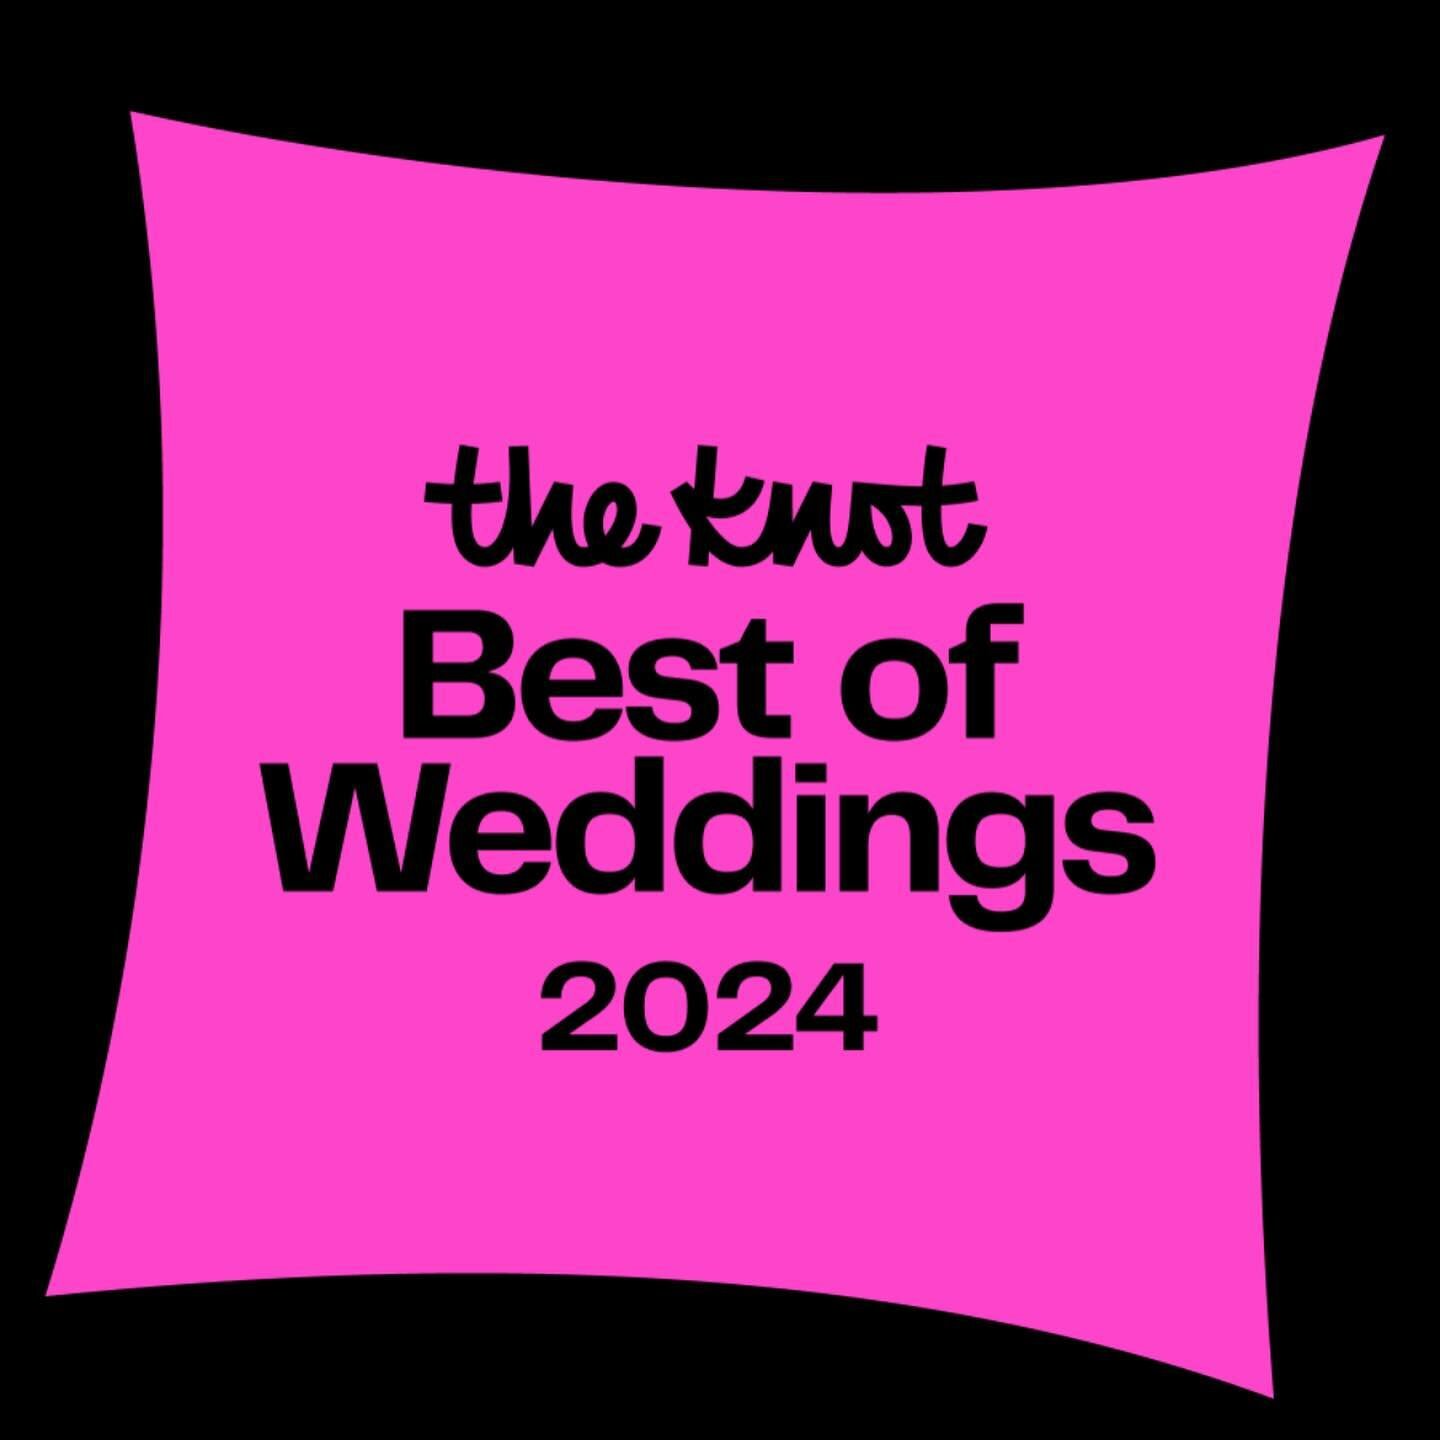 Exciting news! I'm thrilled to announce that Emily Kuhar Photography has been inducted into &quot;The Knot Best Of Weddings: Hall of fame 2024

This is my second year winning this prestigious award! A huge thank you to all my couples for their amazin